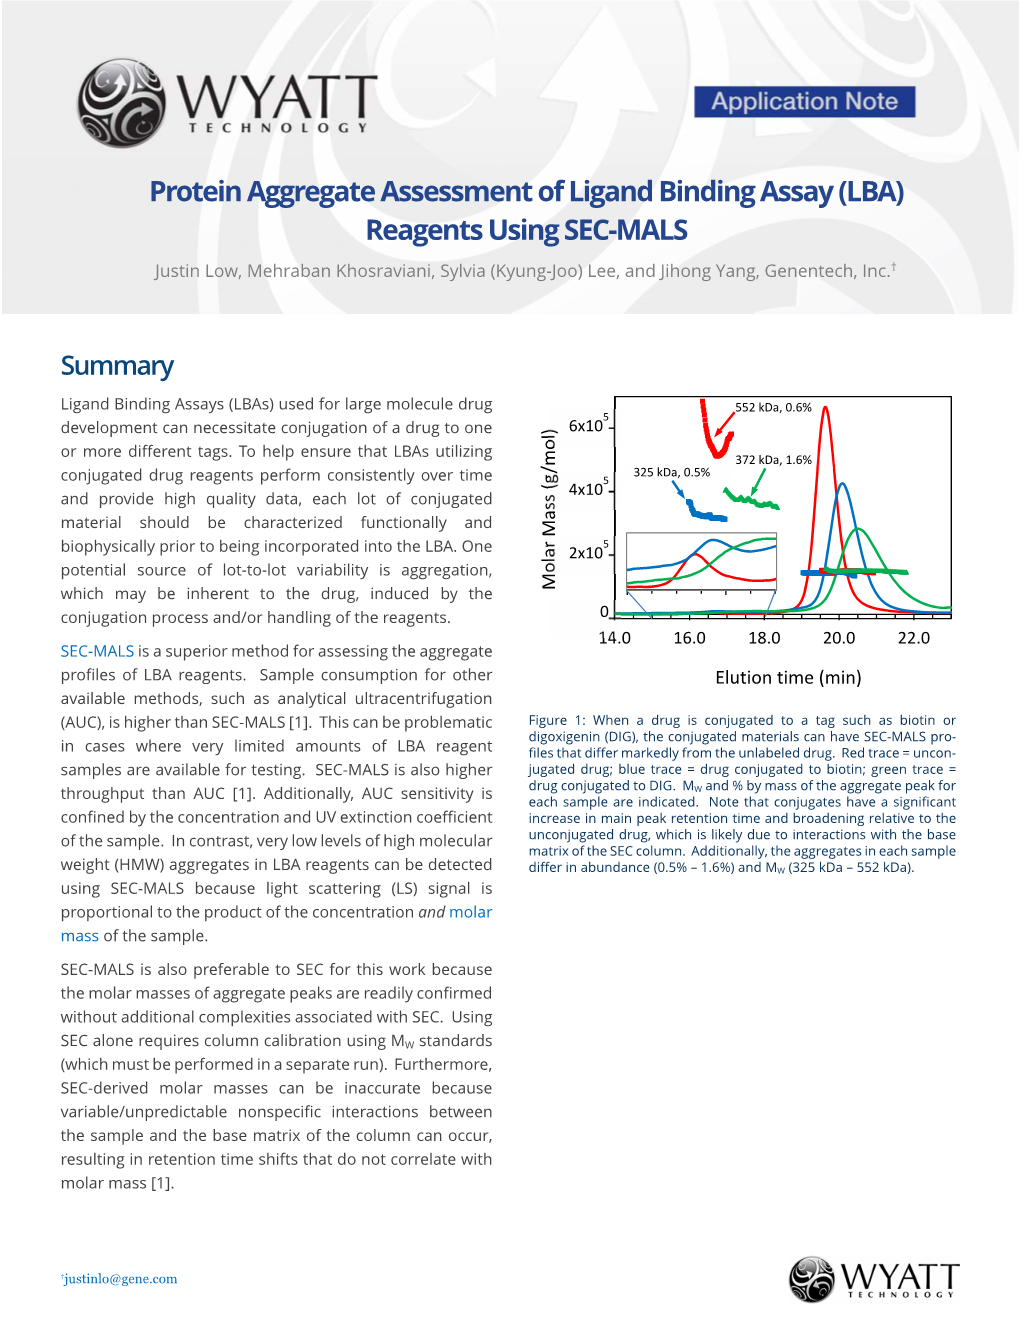 Protein Aggregate Assessment of Ligand Binding Assay (LBA) Reagents Using SEC-MALS